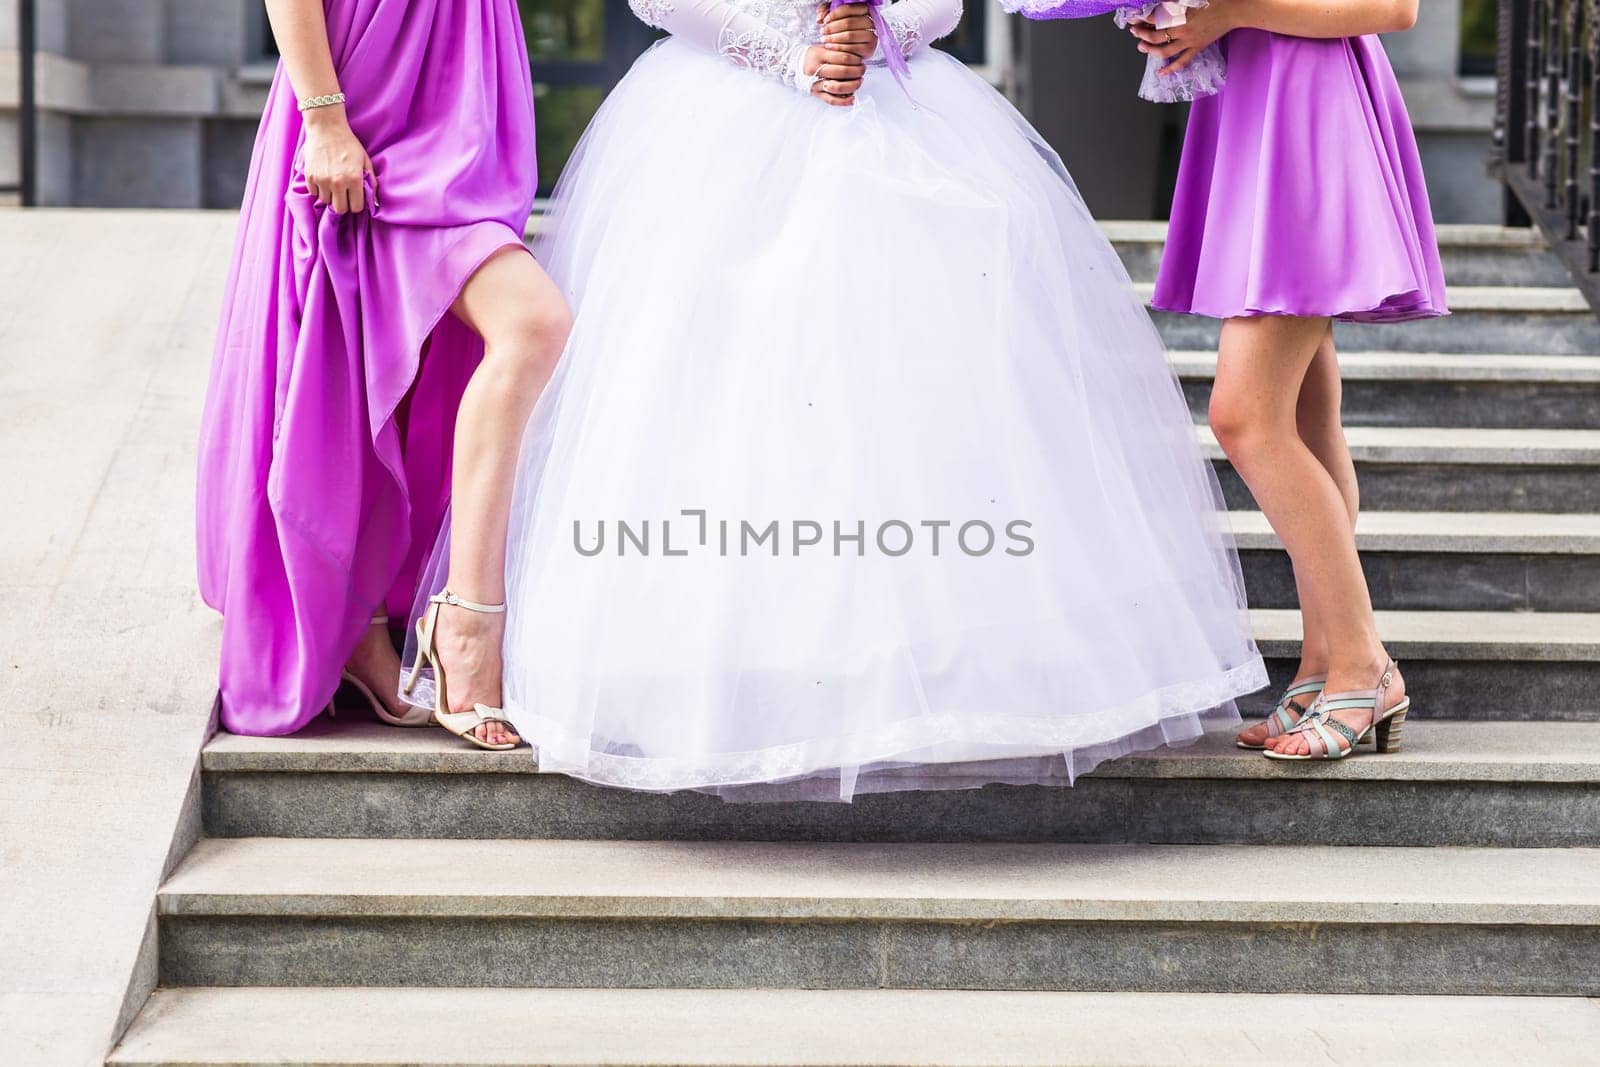 Bride with bridesmaids outdoors on the wedding day by Satura86